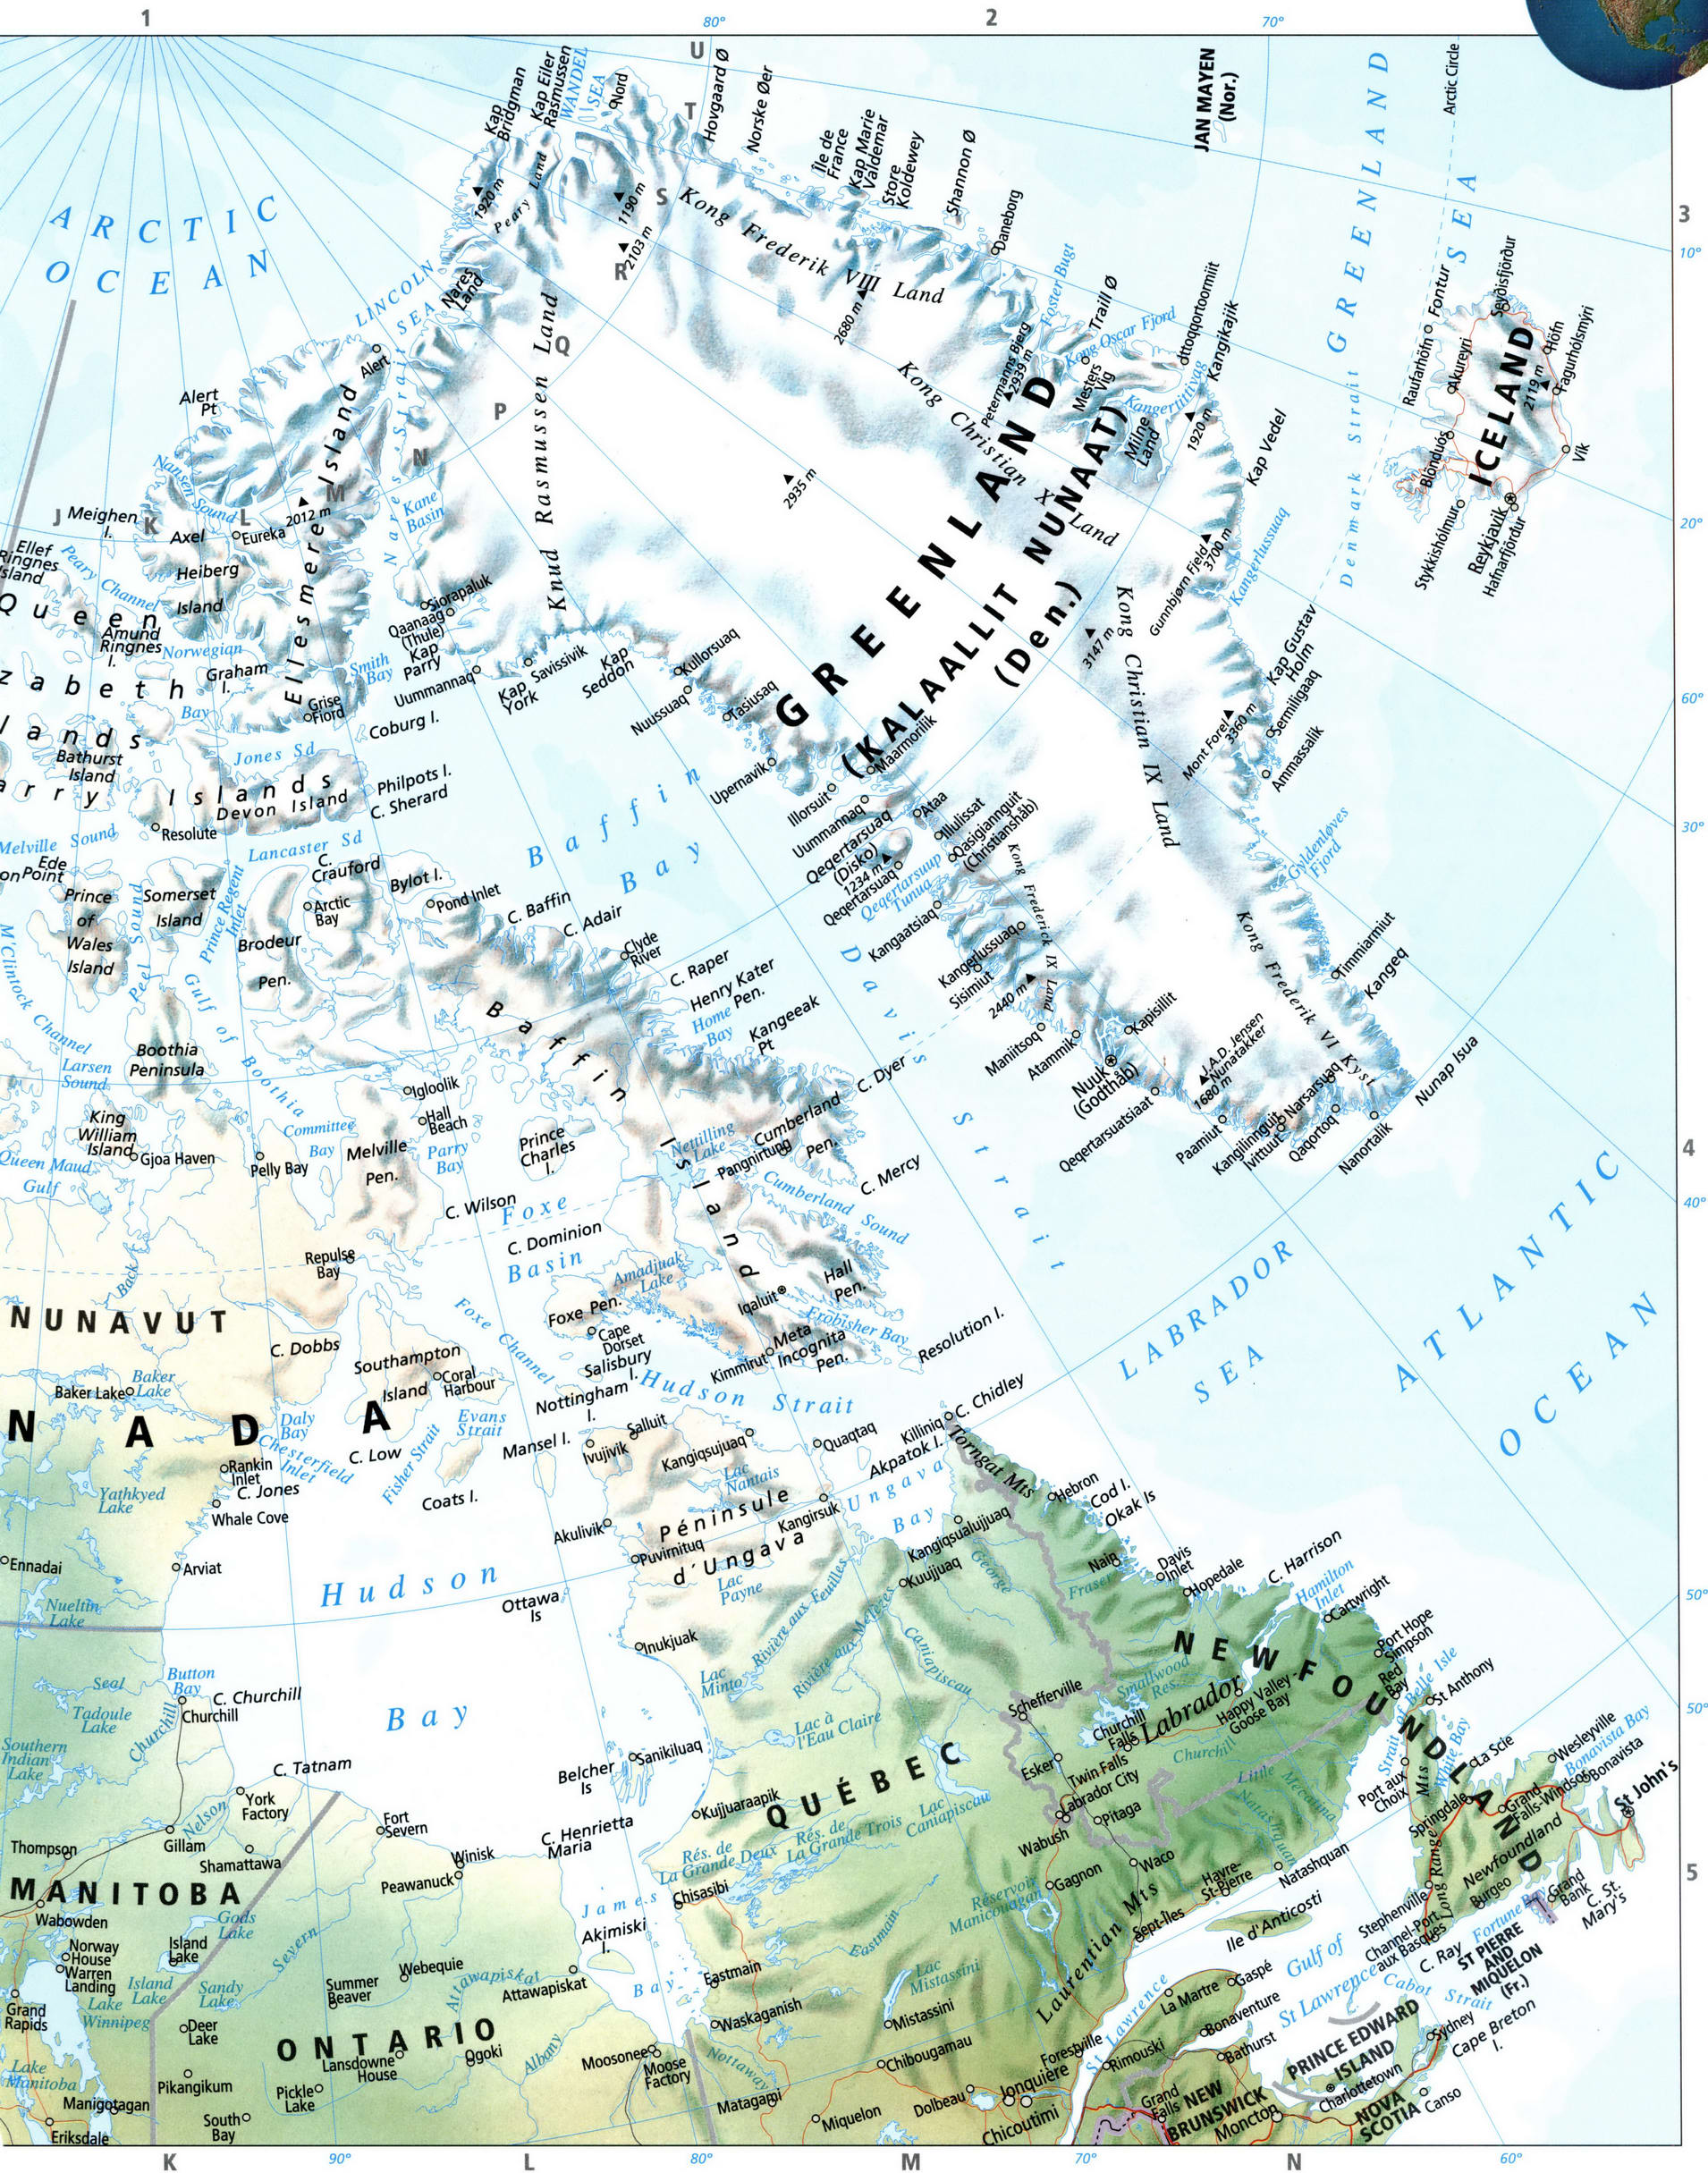 North Canada and Greenland map